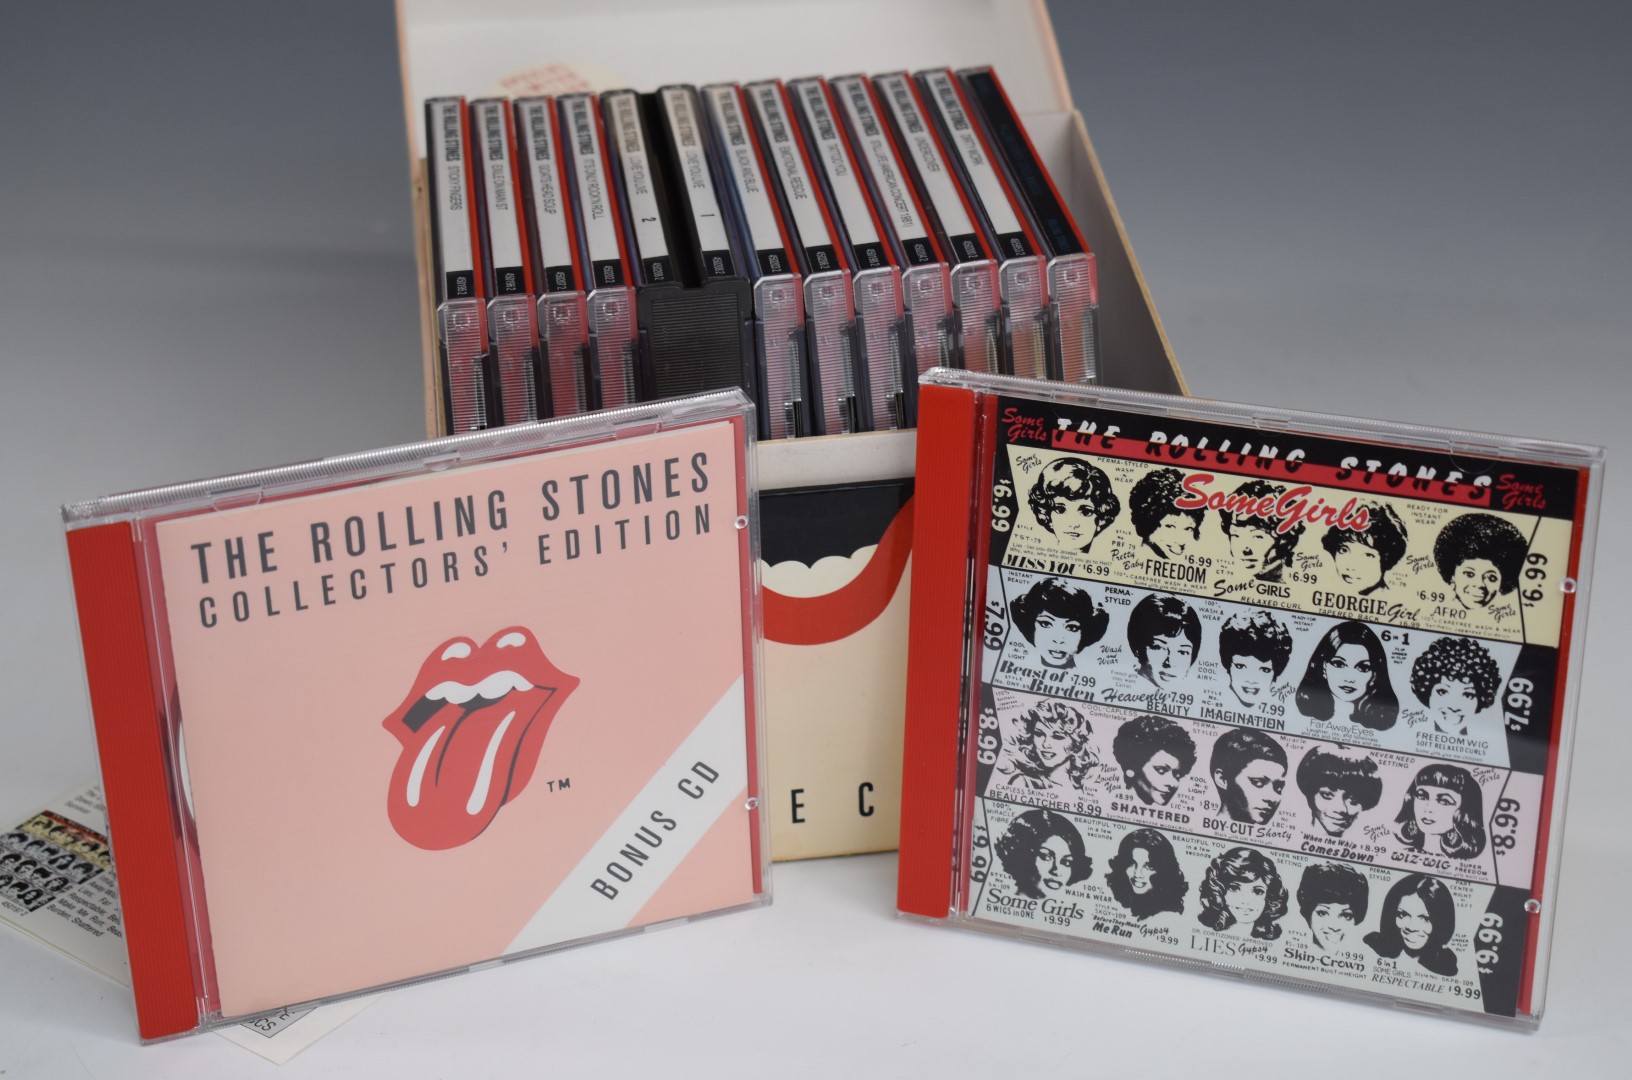 The Rolling Stones - Collection 1971-1989 (4669182) CD box set. CDs etc appear EX with wear/ageing - Image 4 of 5